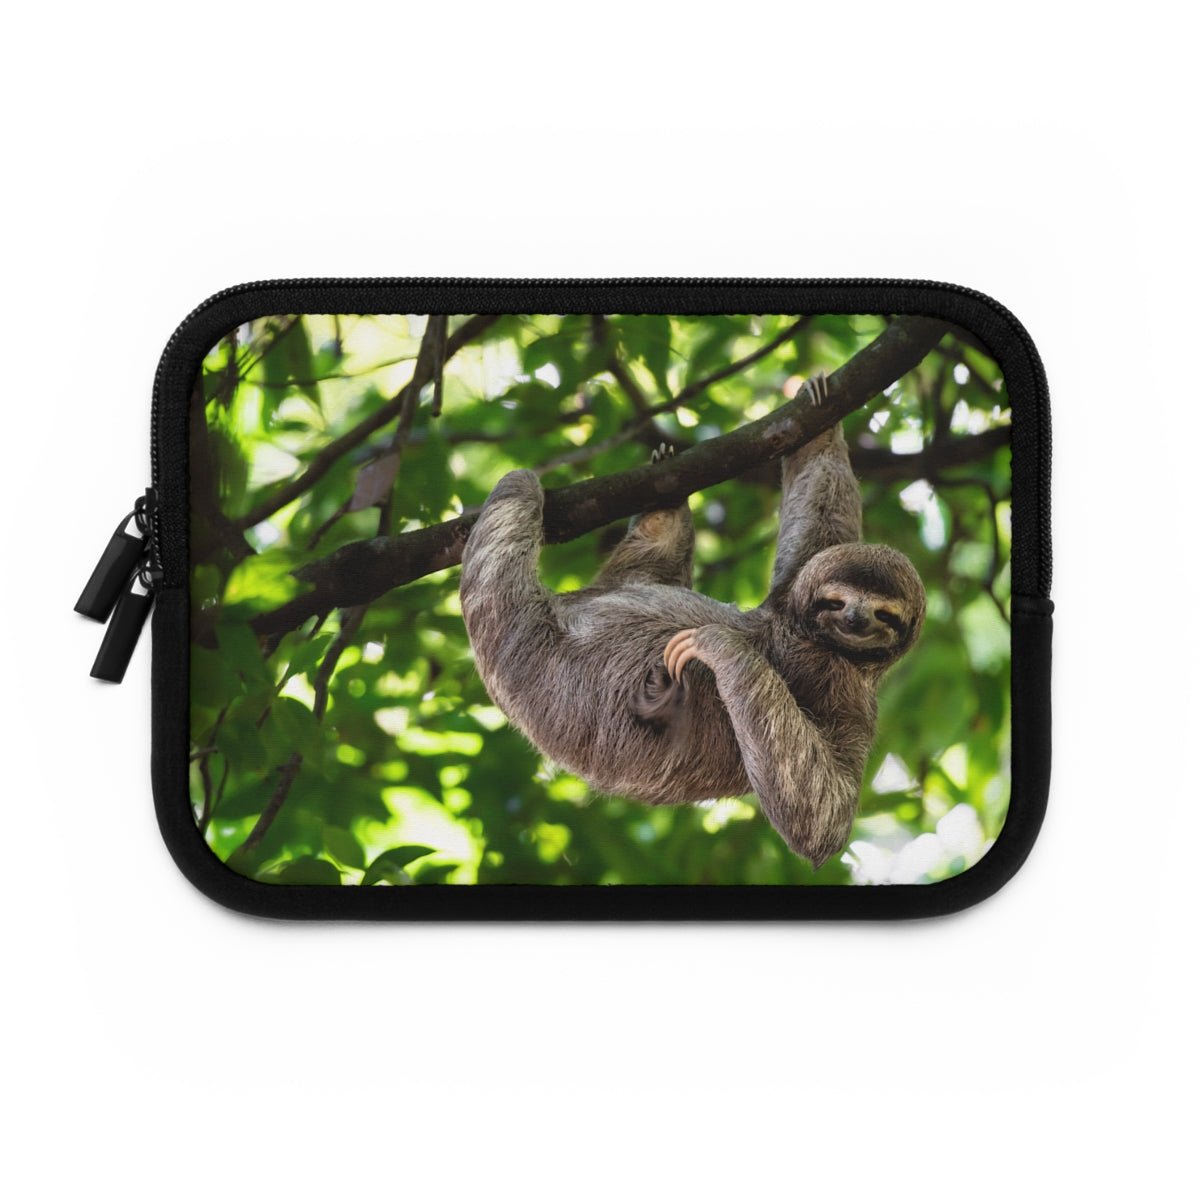 Cute Hanging Sloth Laptop Sleeve - Puffin Lime